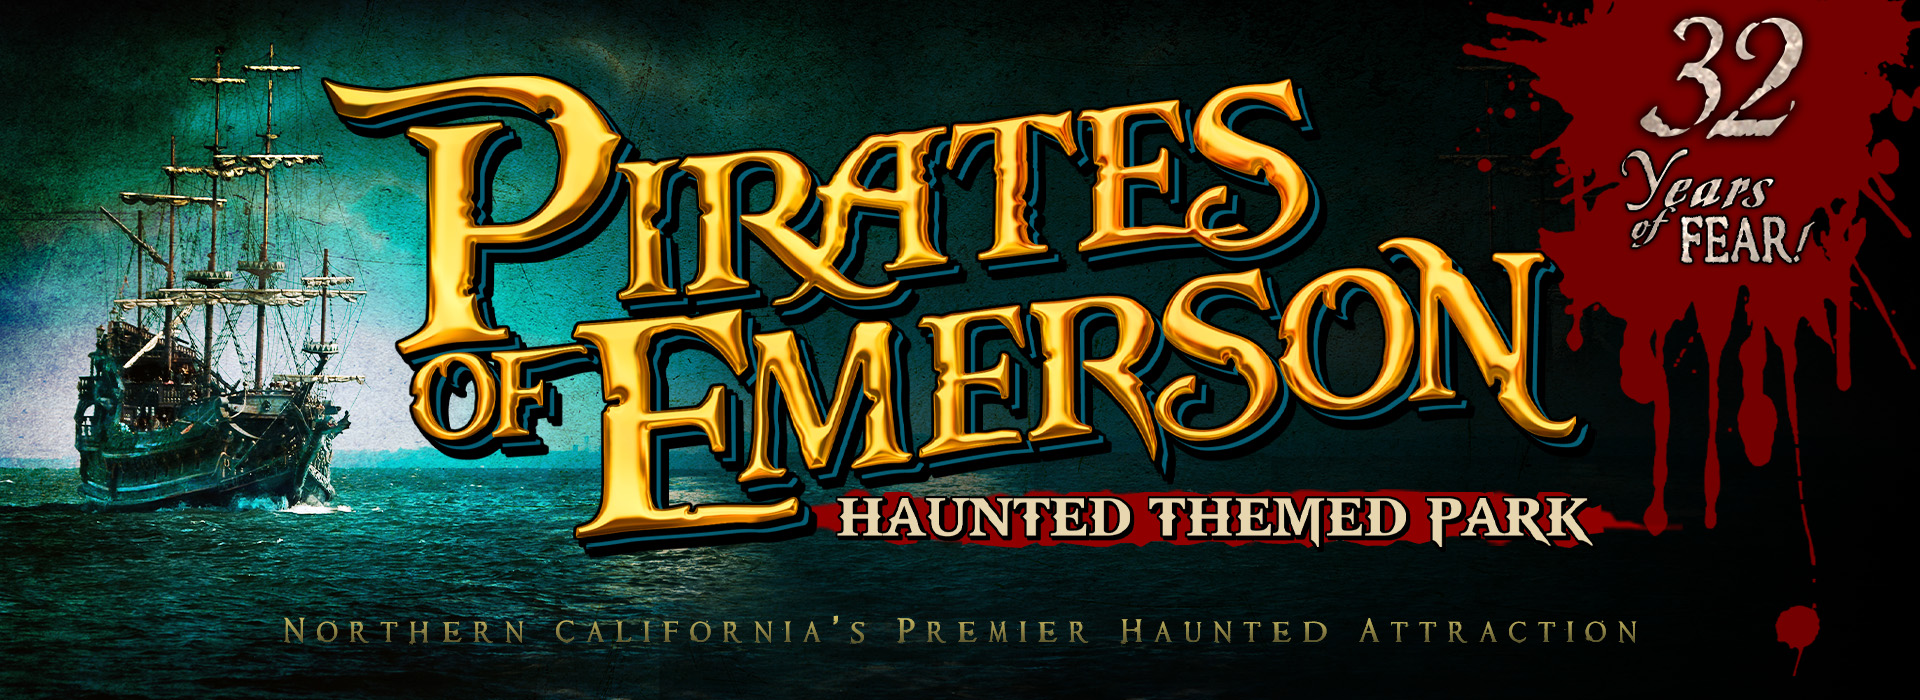 Pirates of Emerson Haunted Theme Park (Oct 11-13)